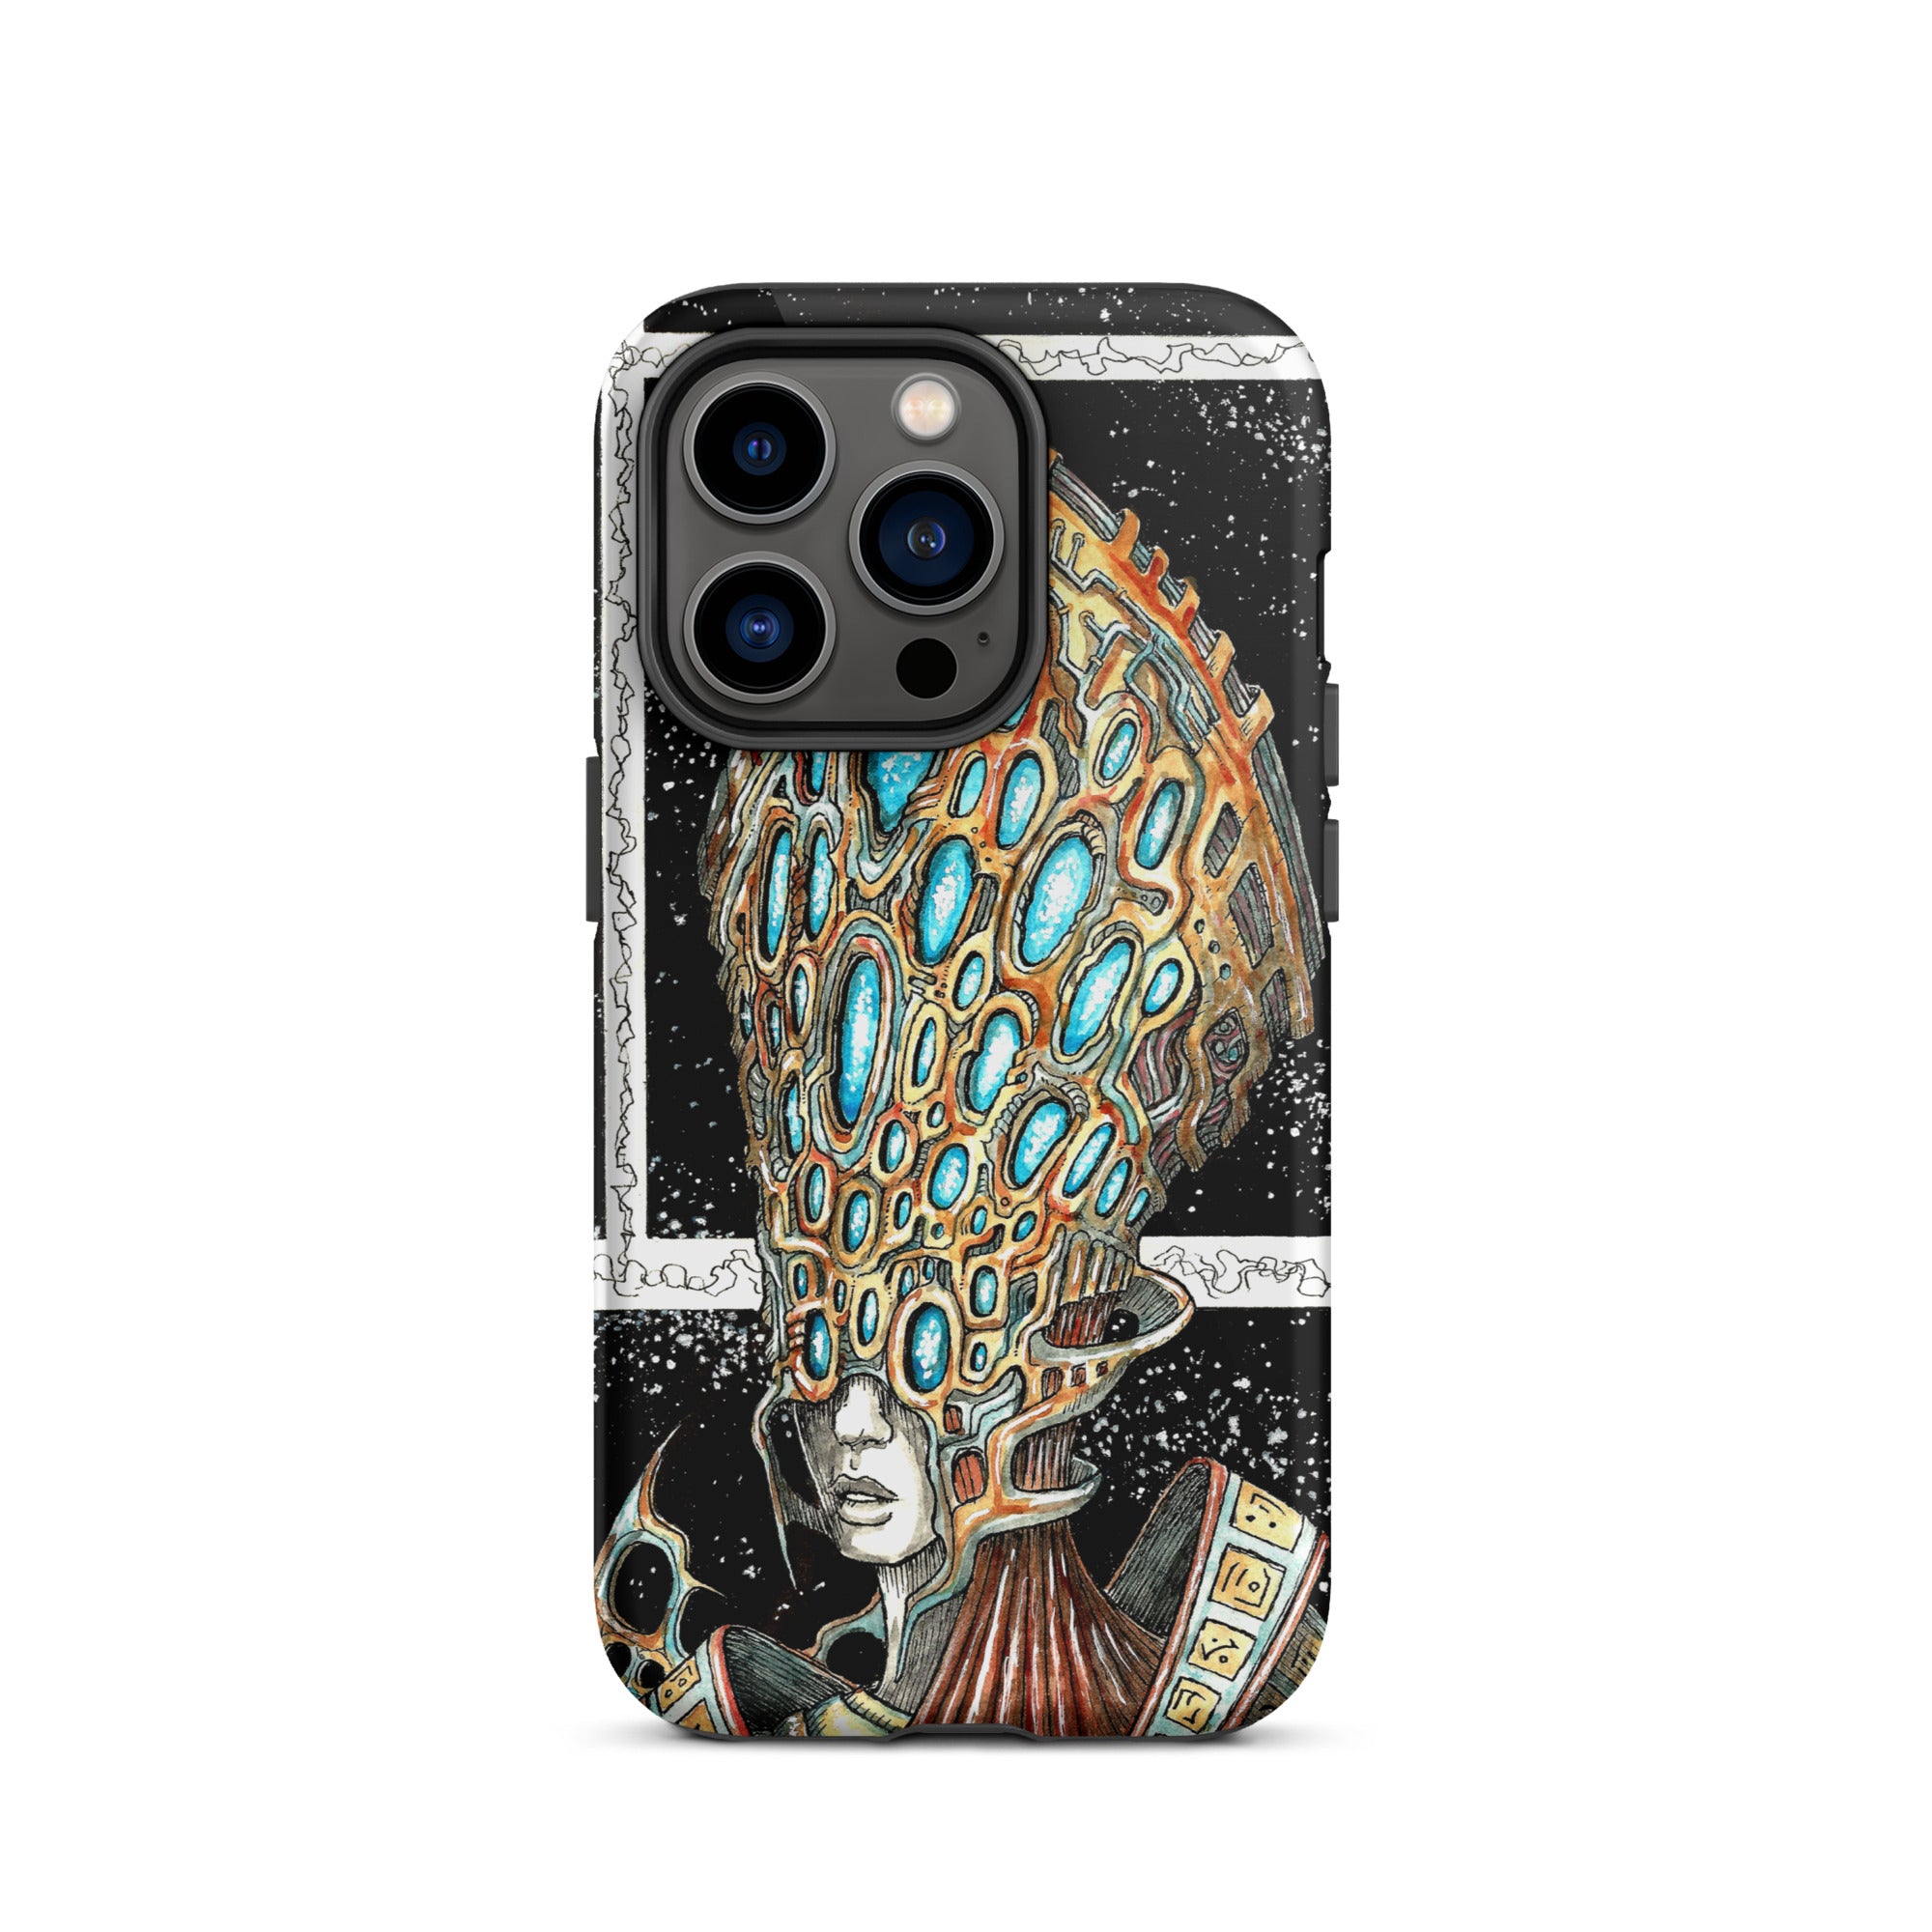 Tough iPhone Case - The 1000 Eyes Lady